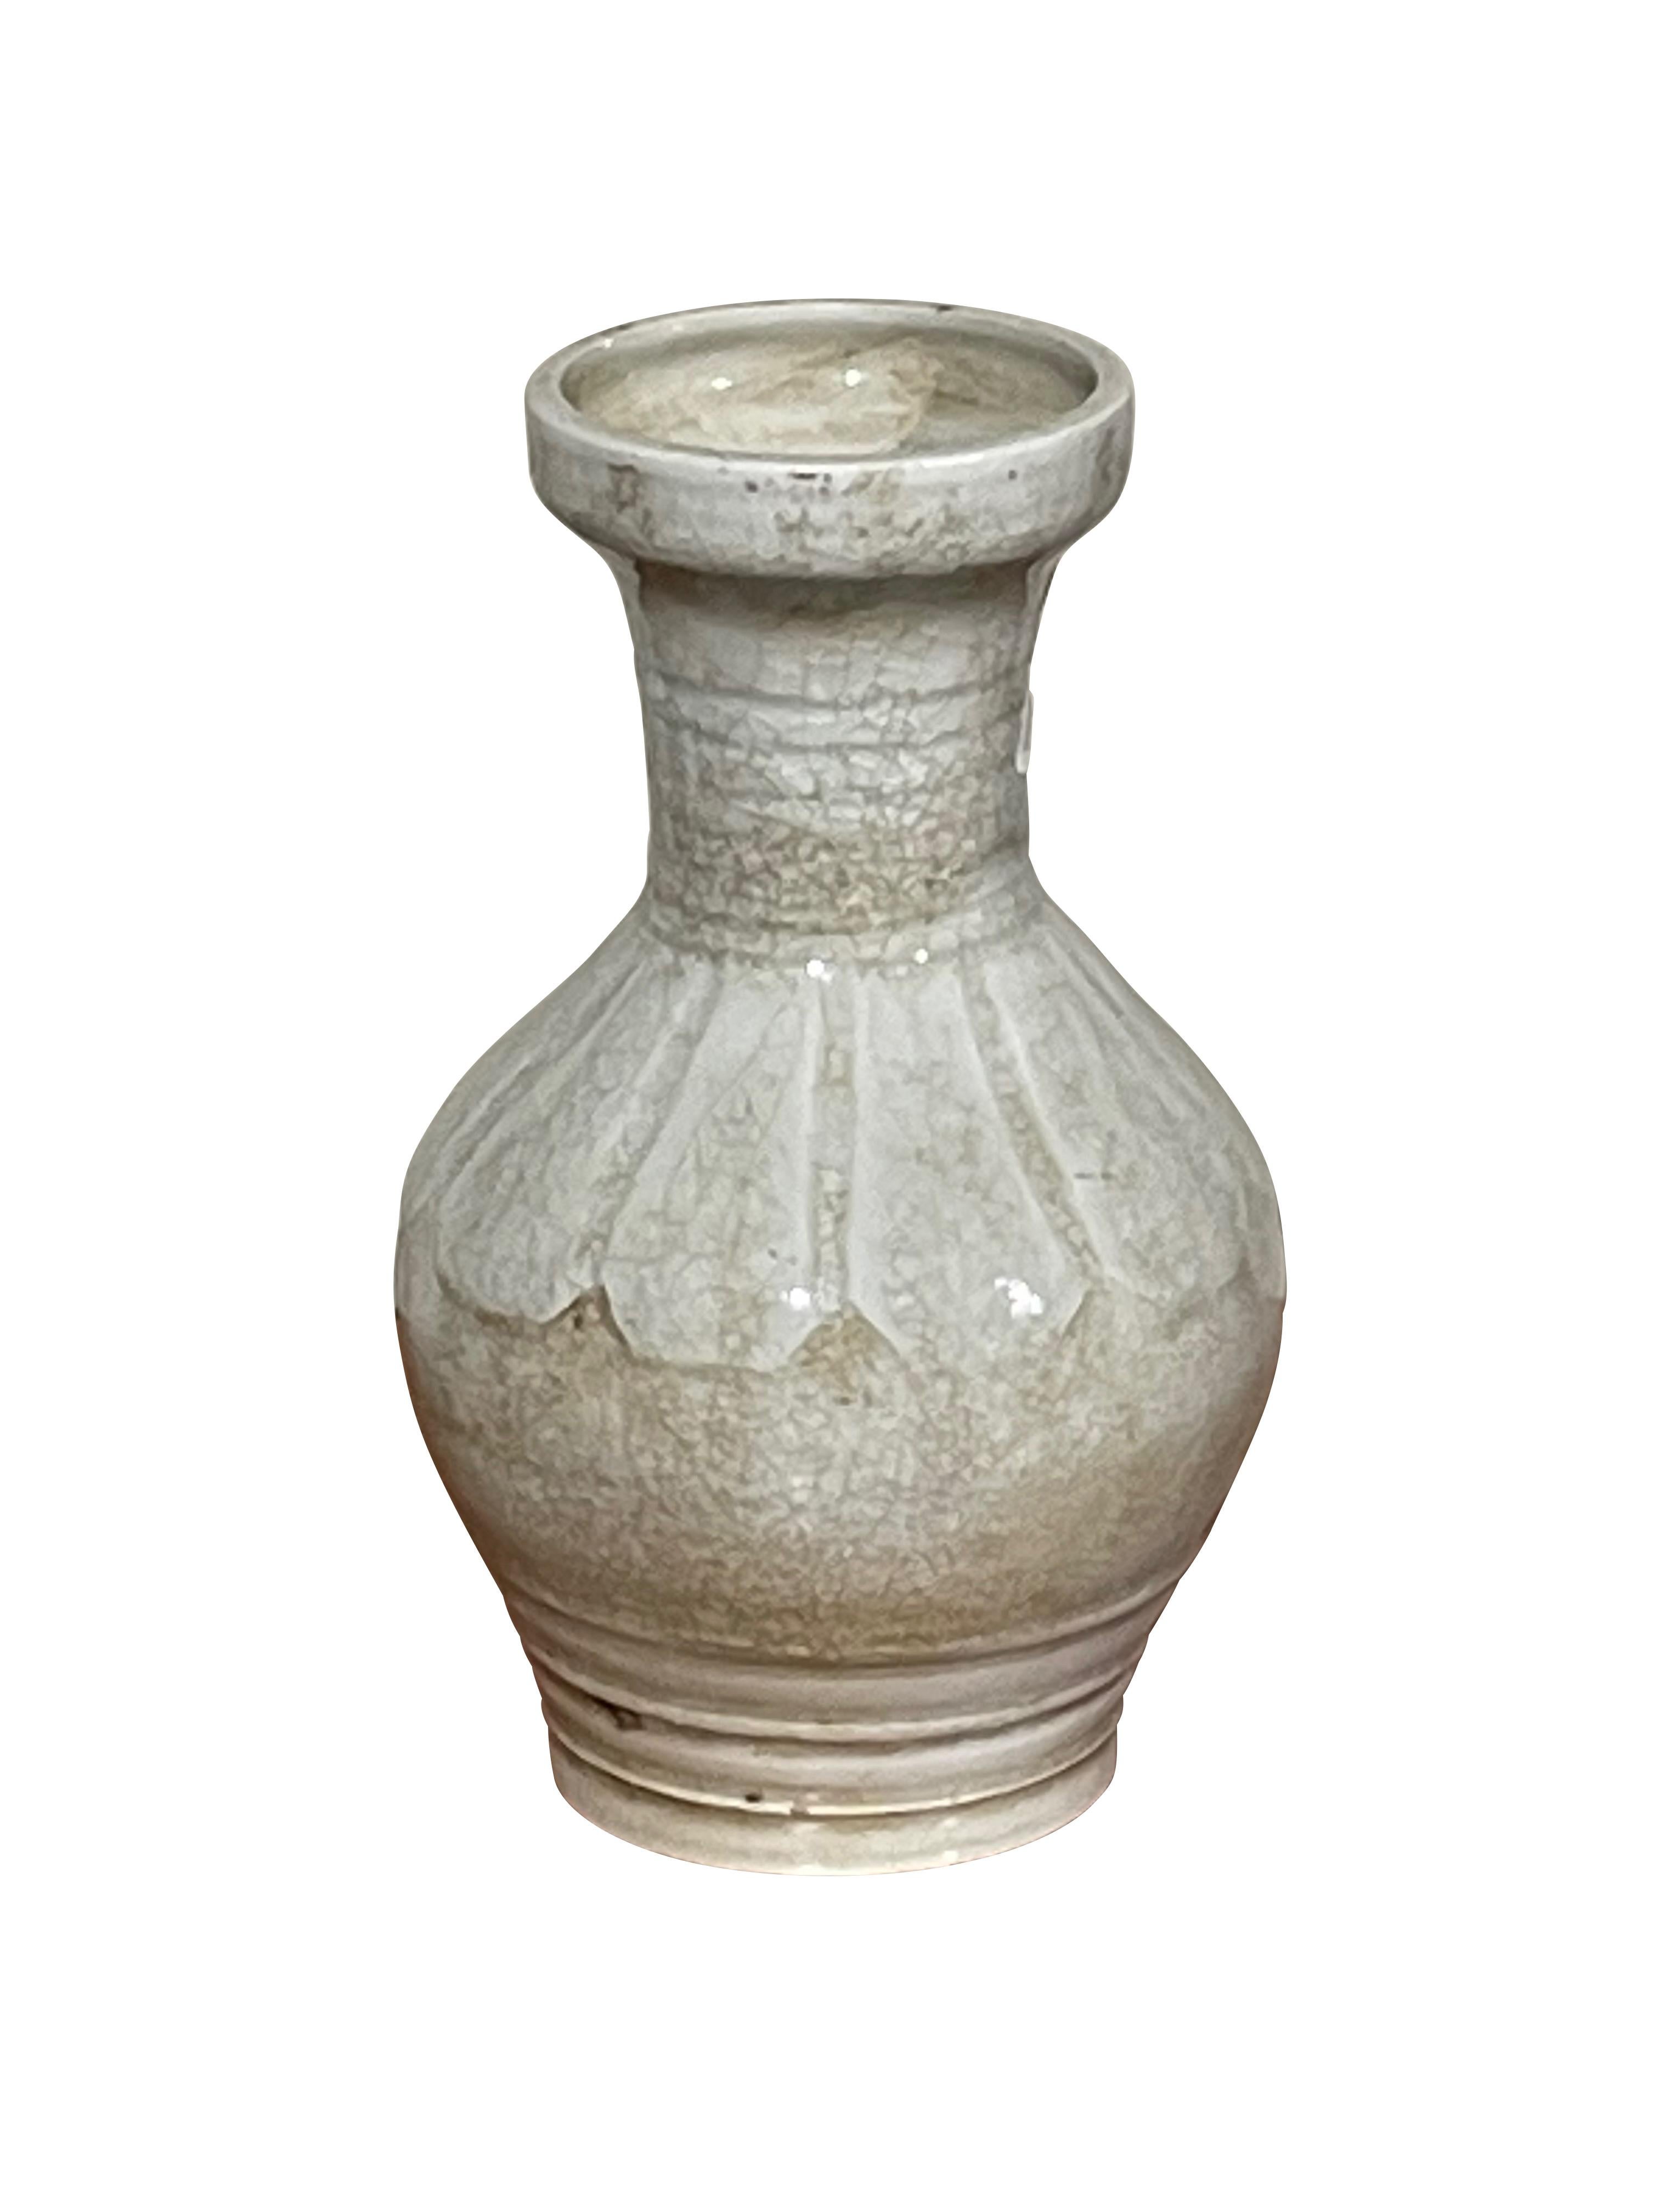 Contemporary Chinese decorative patterned white vase.
From a collection of three sold individually.
ARRIVING MARCH